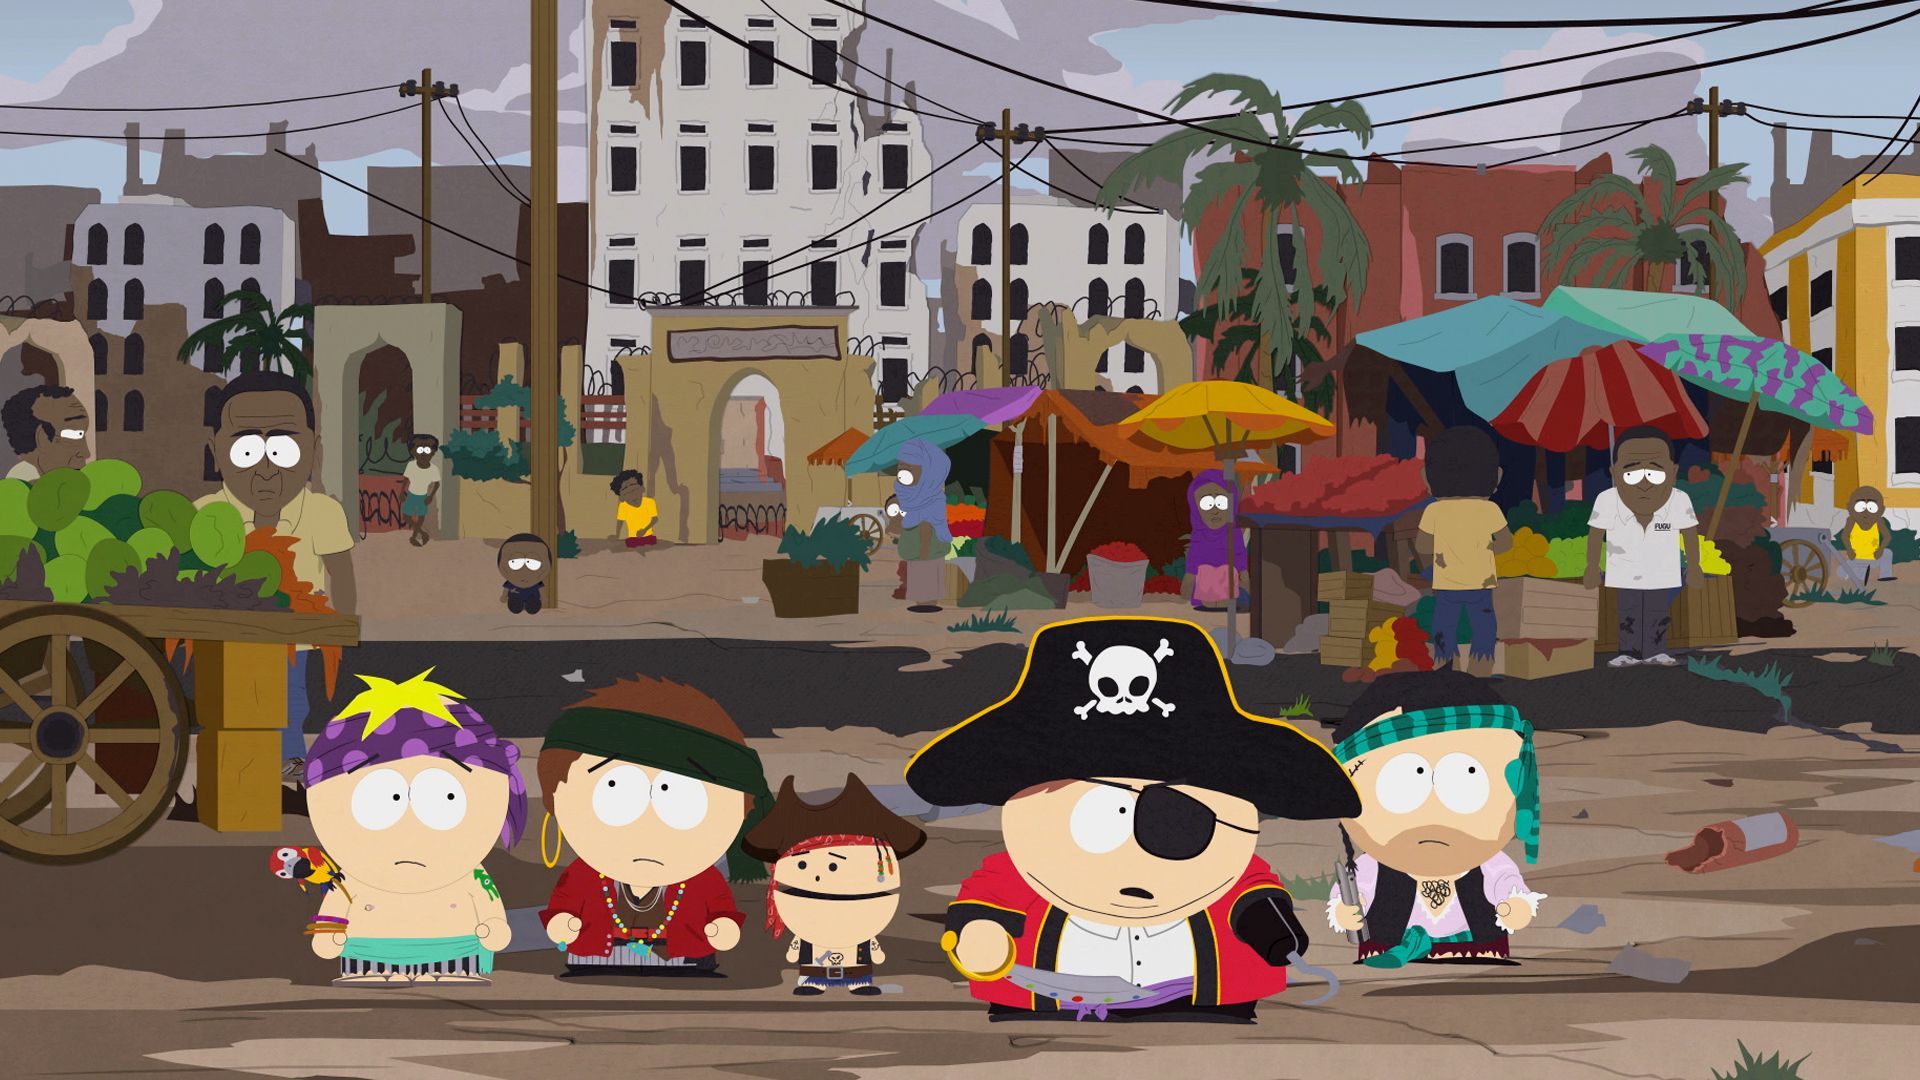 Where's All the Waterfalls? - Seizoen 13 Aflevering 7 - South Park